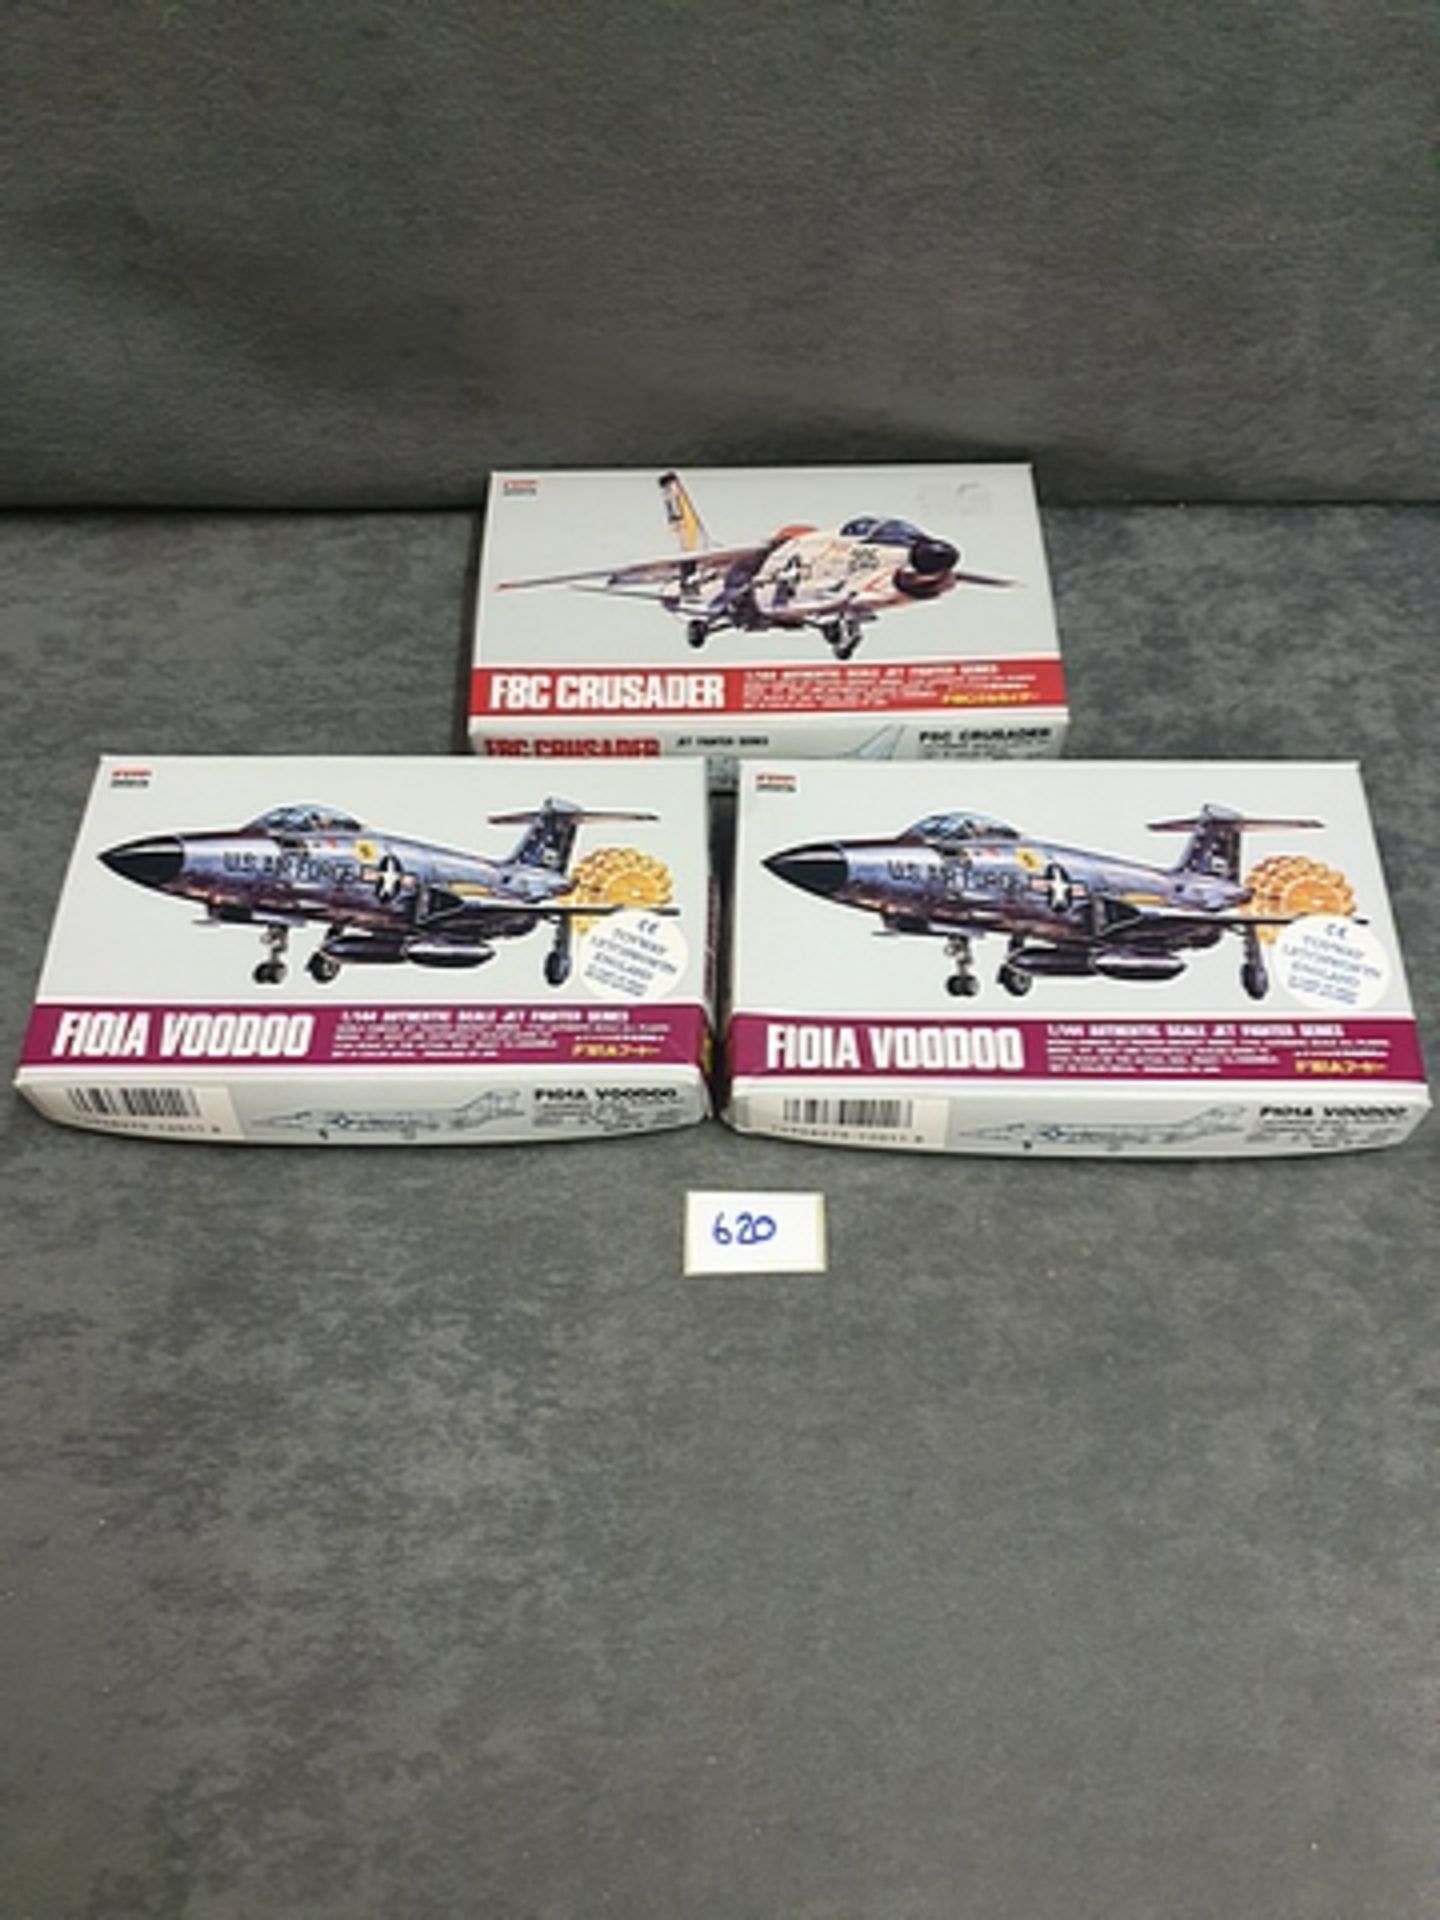 3x ARII Plastic Model Kits 1/144 Scale On Sprues With Instructions Comprising Of 2x #A395-100